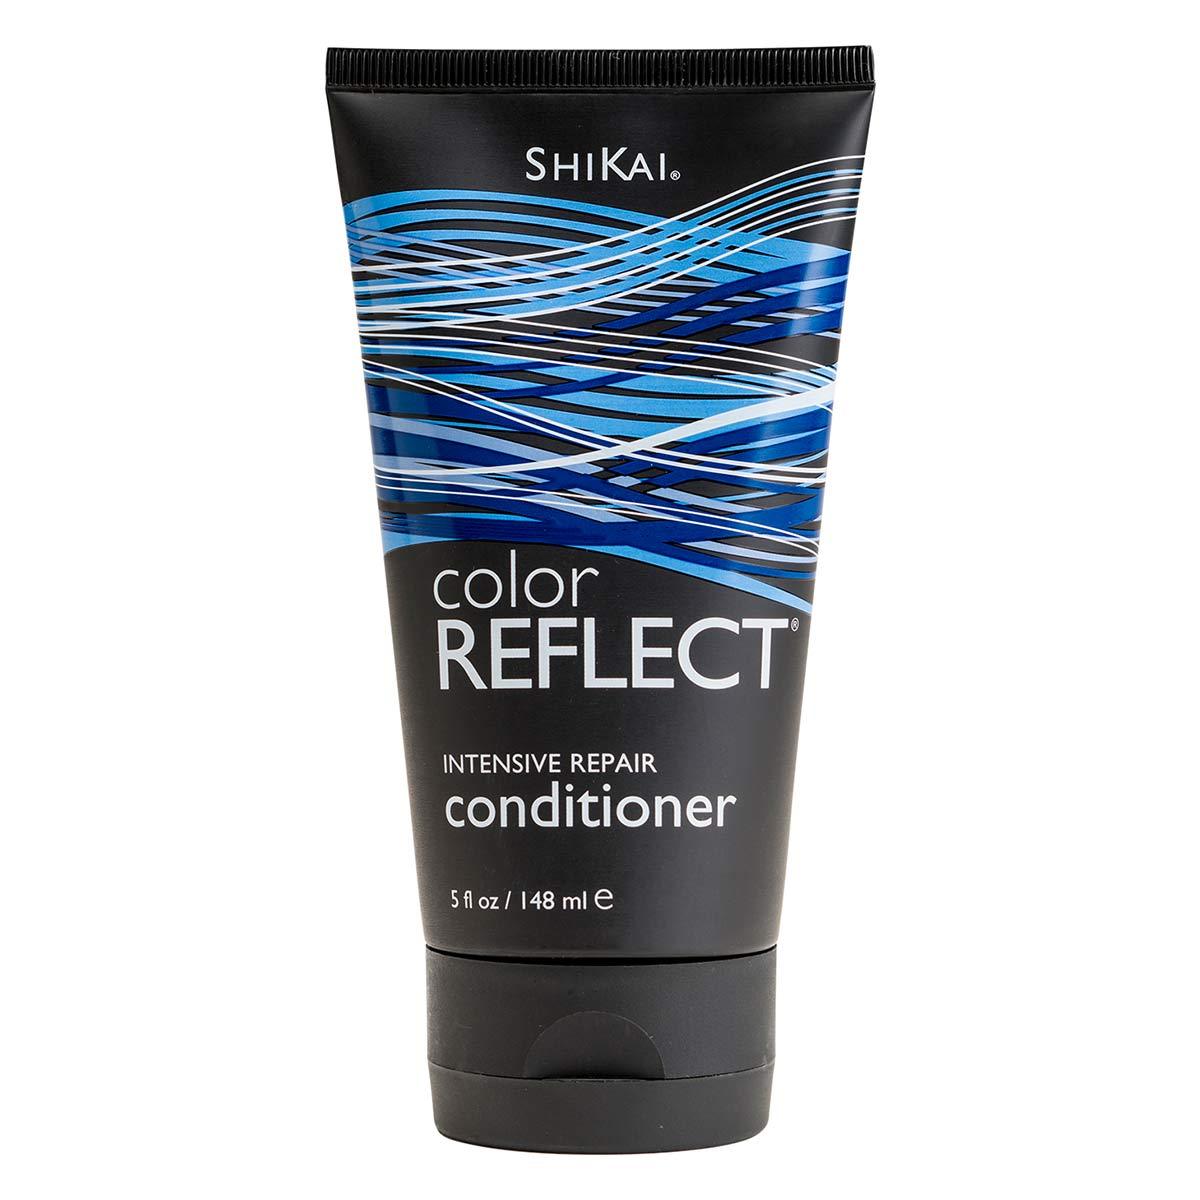 Primary image of Color Reflect Intensive Repair Conditioner